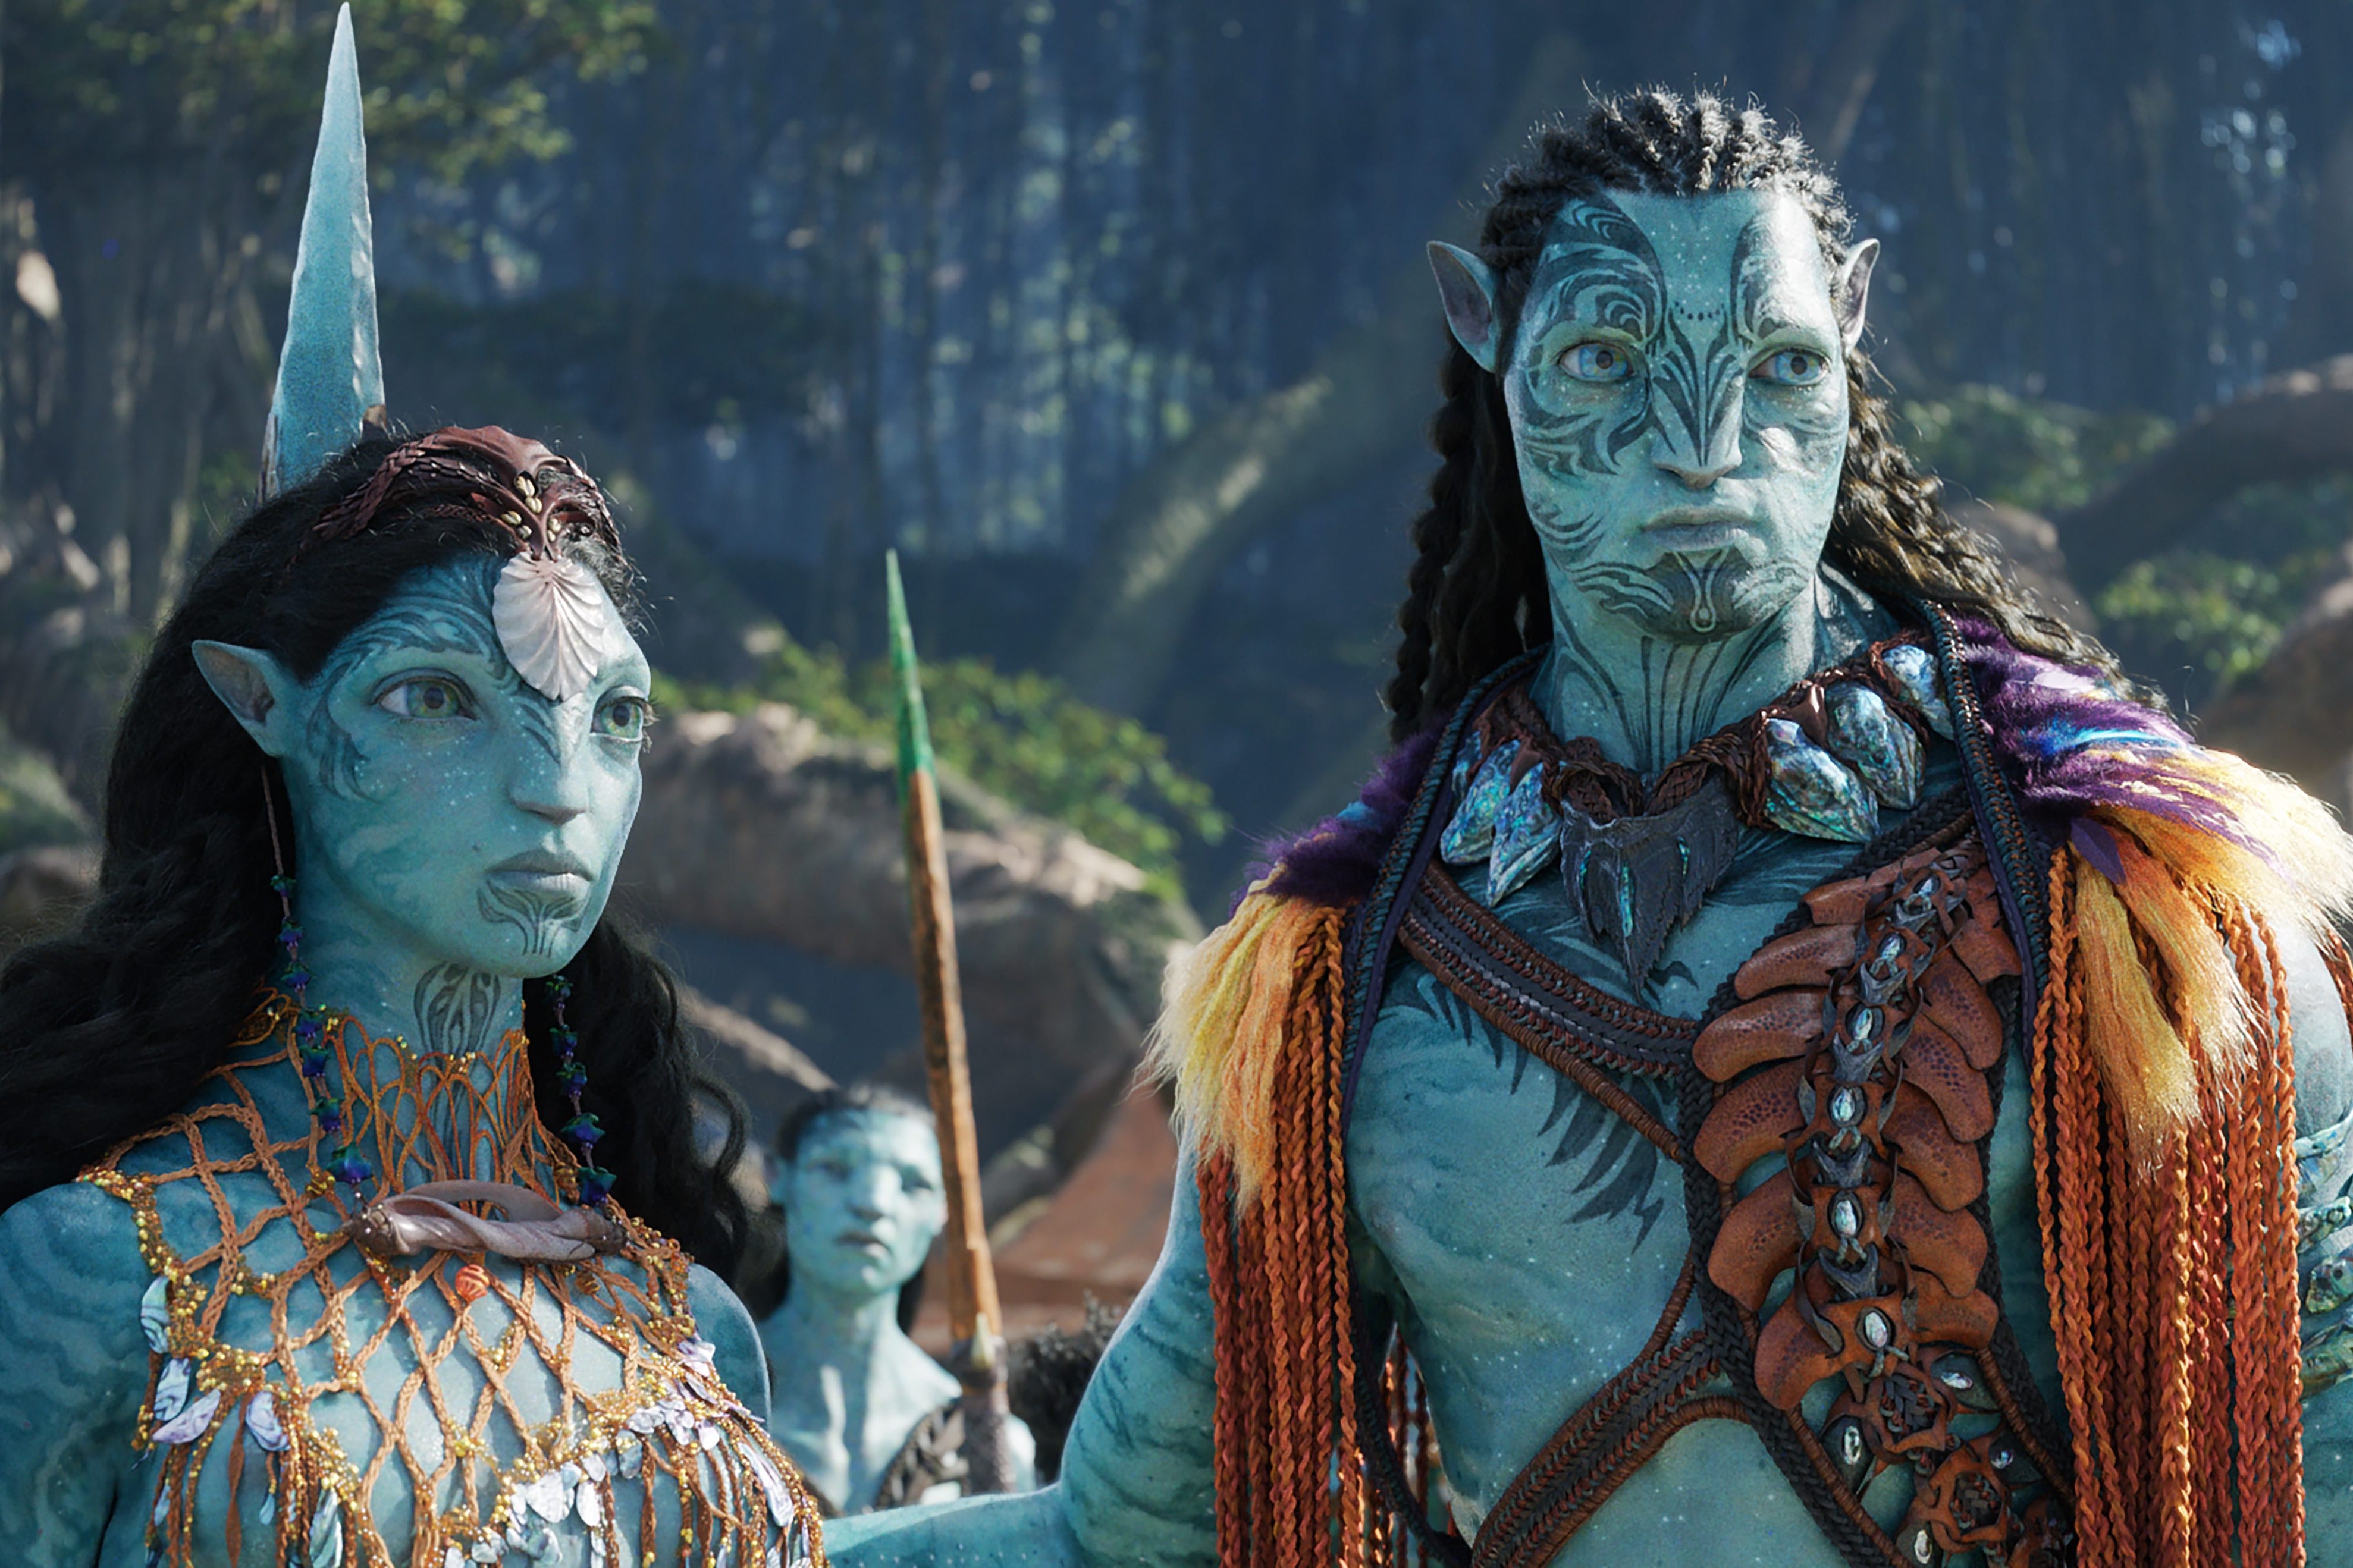 Avatar: The Way of Water can't quit one of sci-fi's most racist tropes.